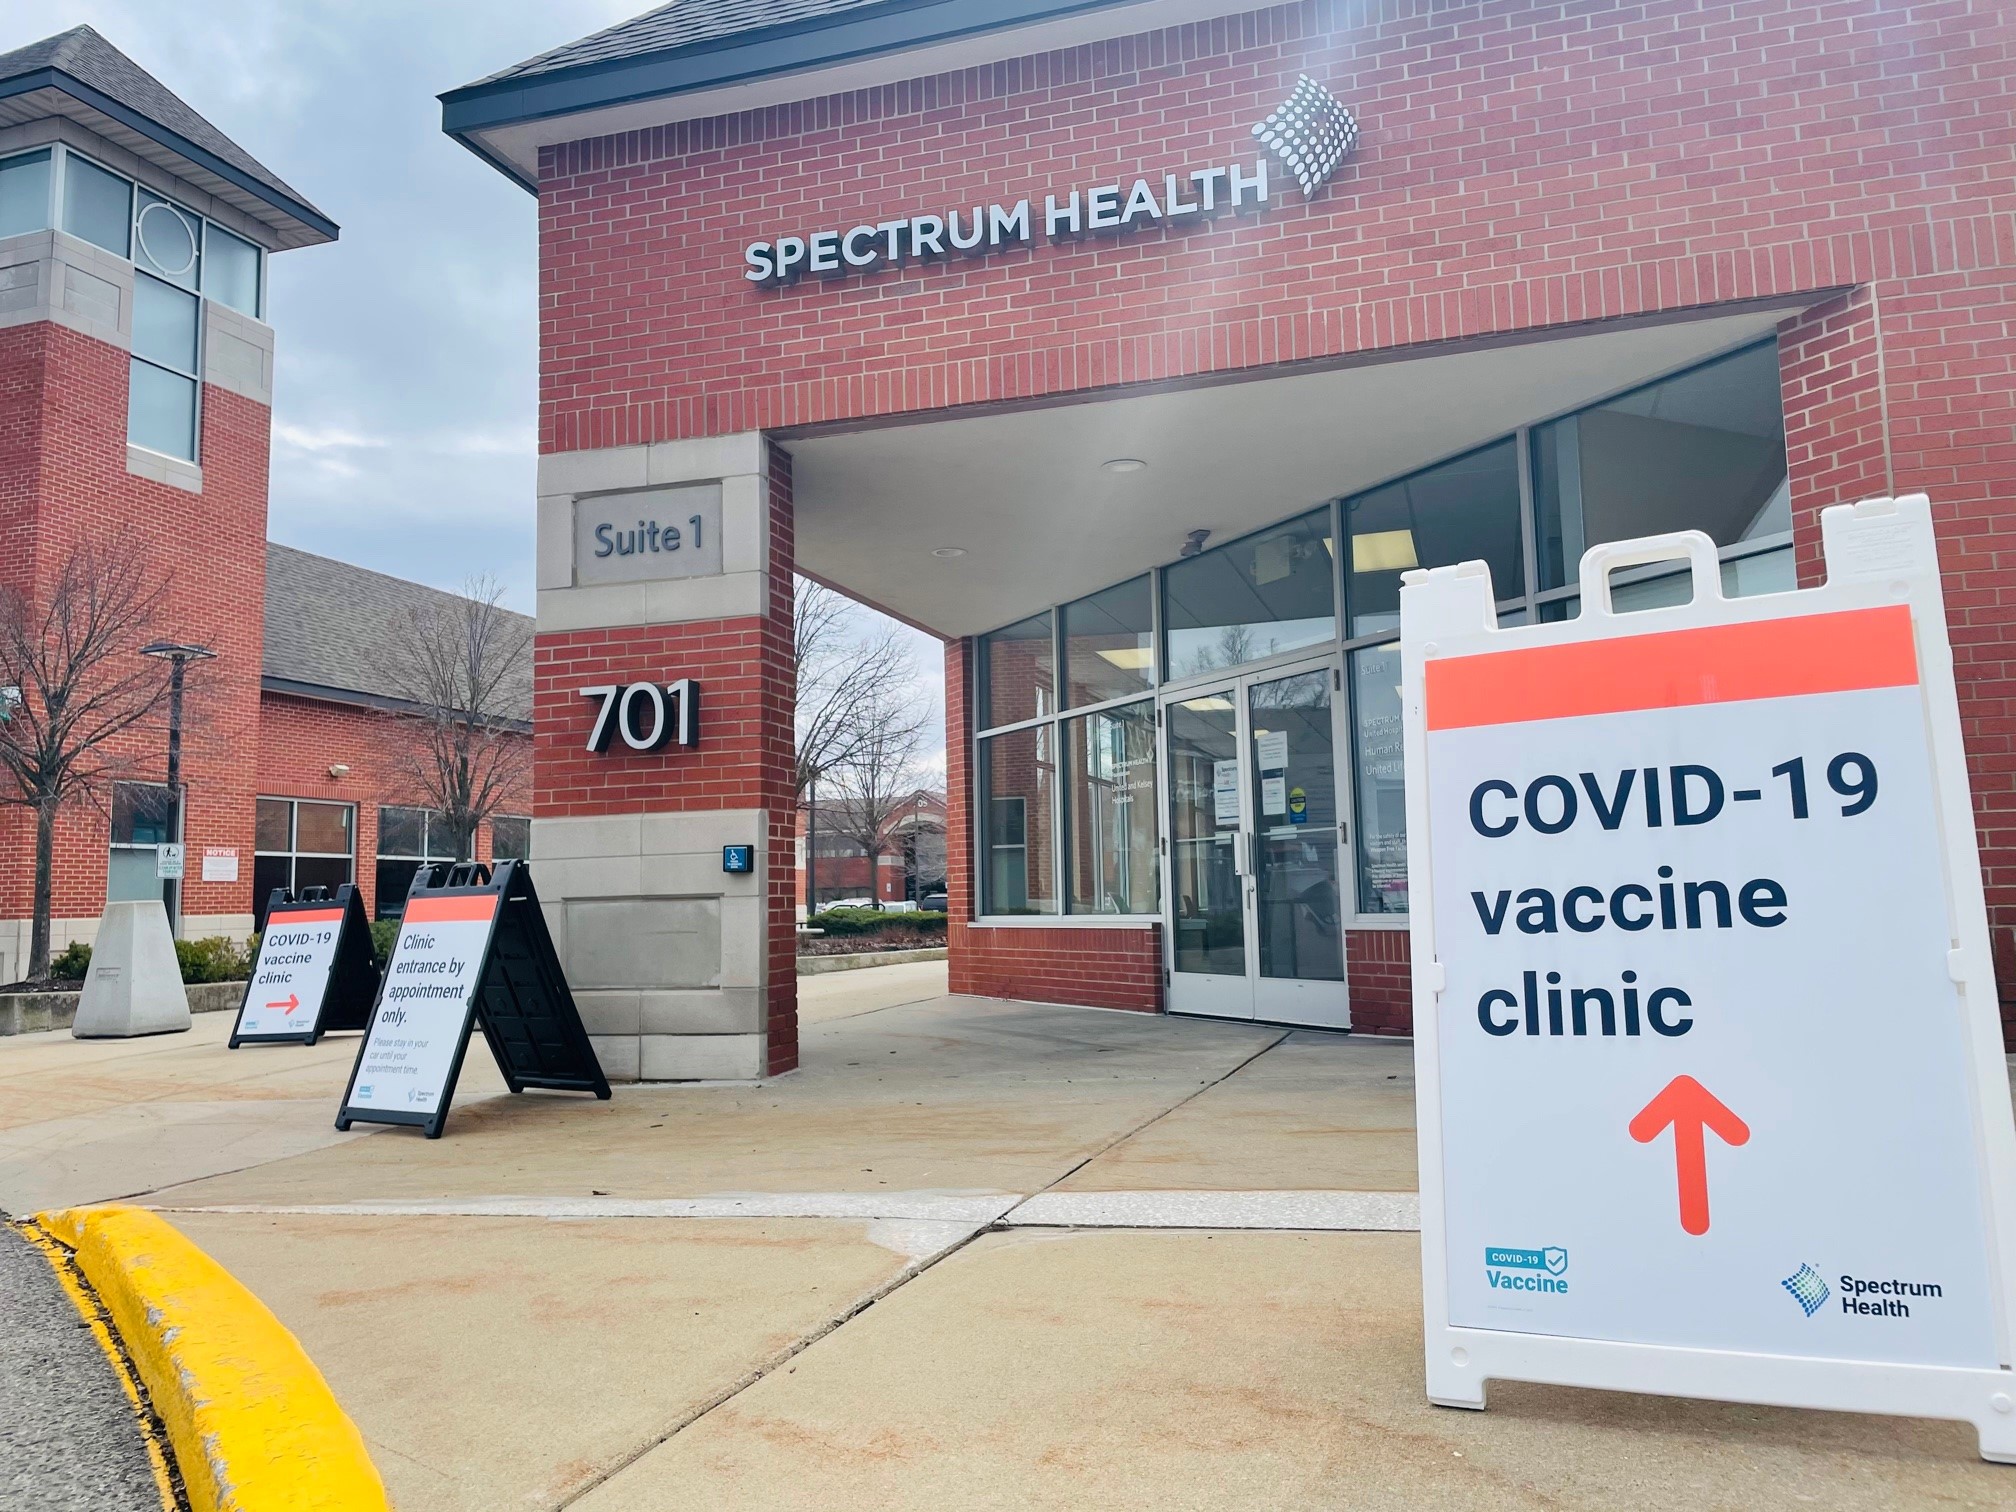 Covid-19 Vaccinations Available For Adults And Kids At Several Spectrum Health Locations This Week - Spectrum Health Newsroom